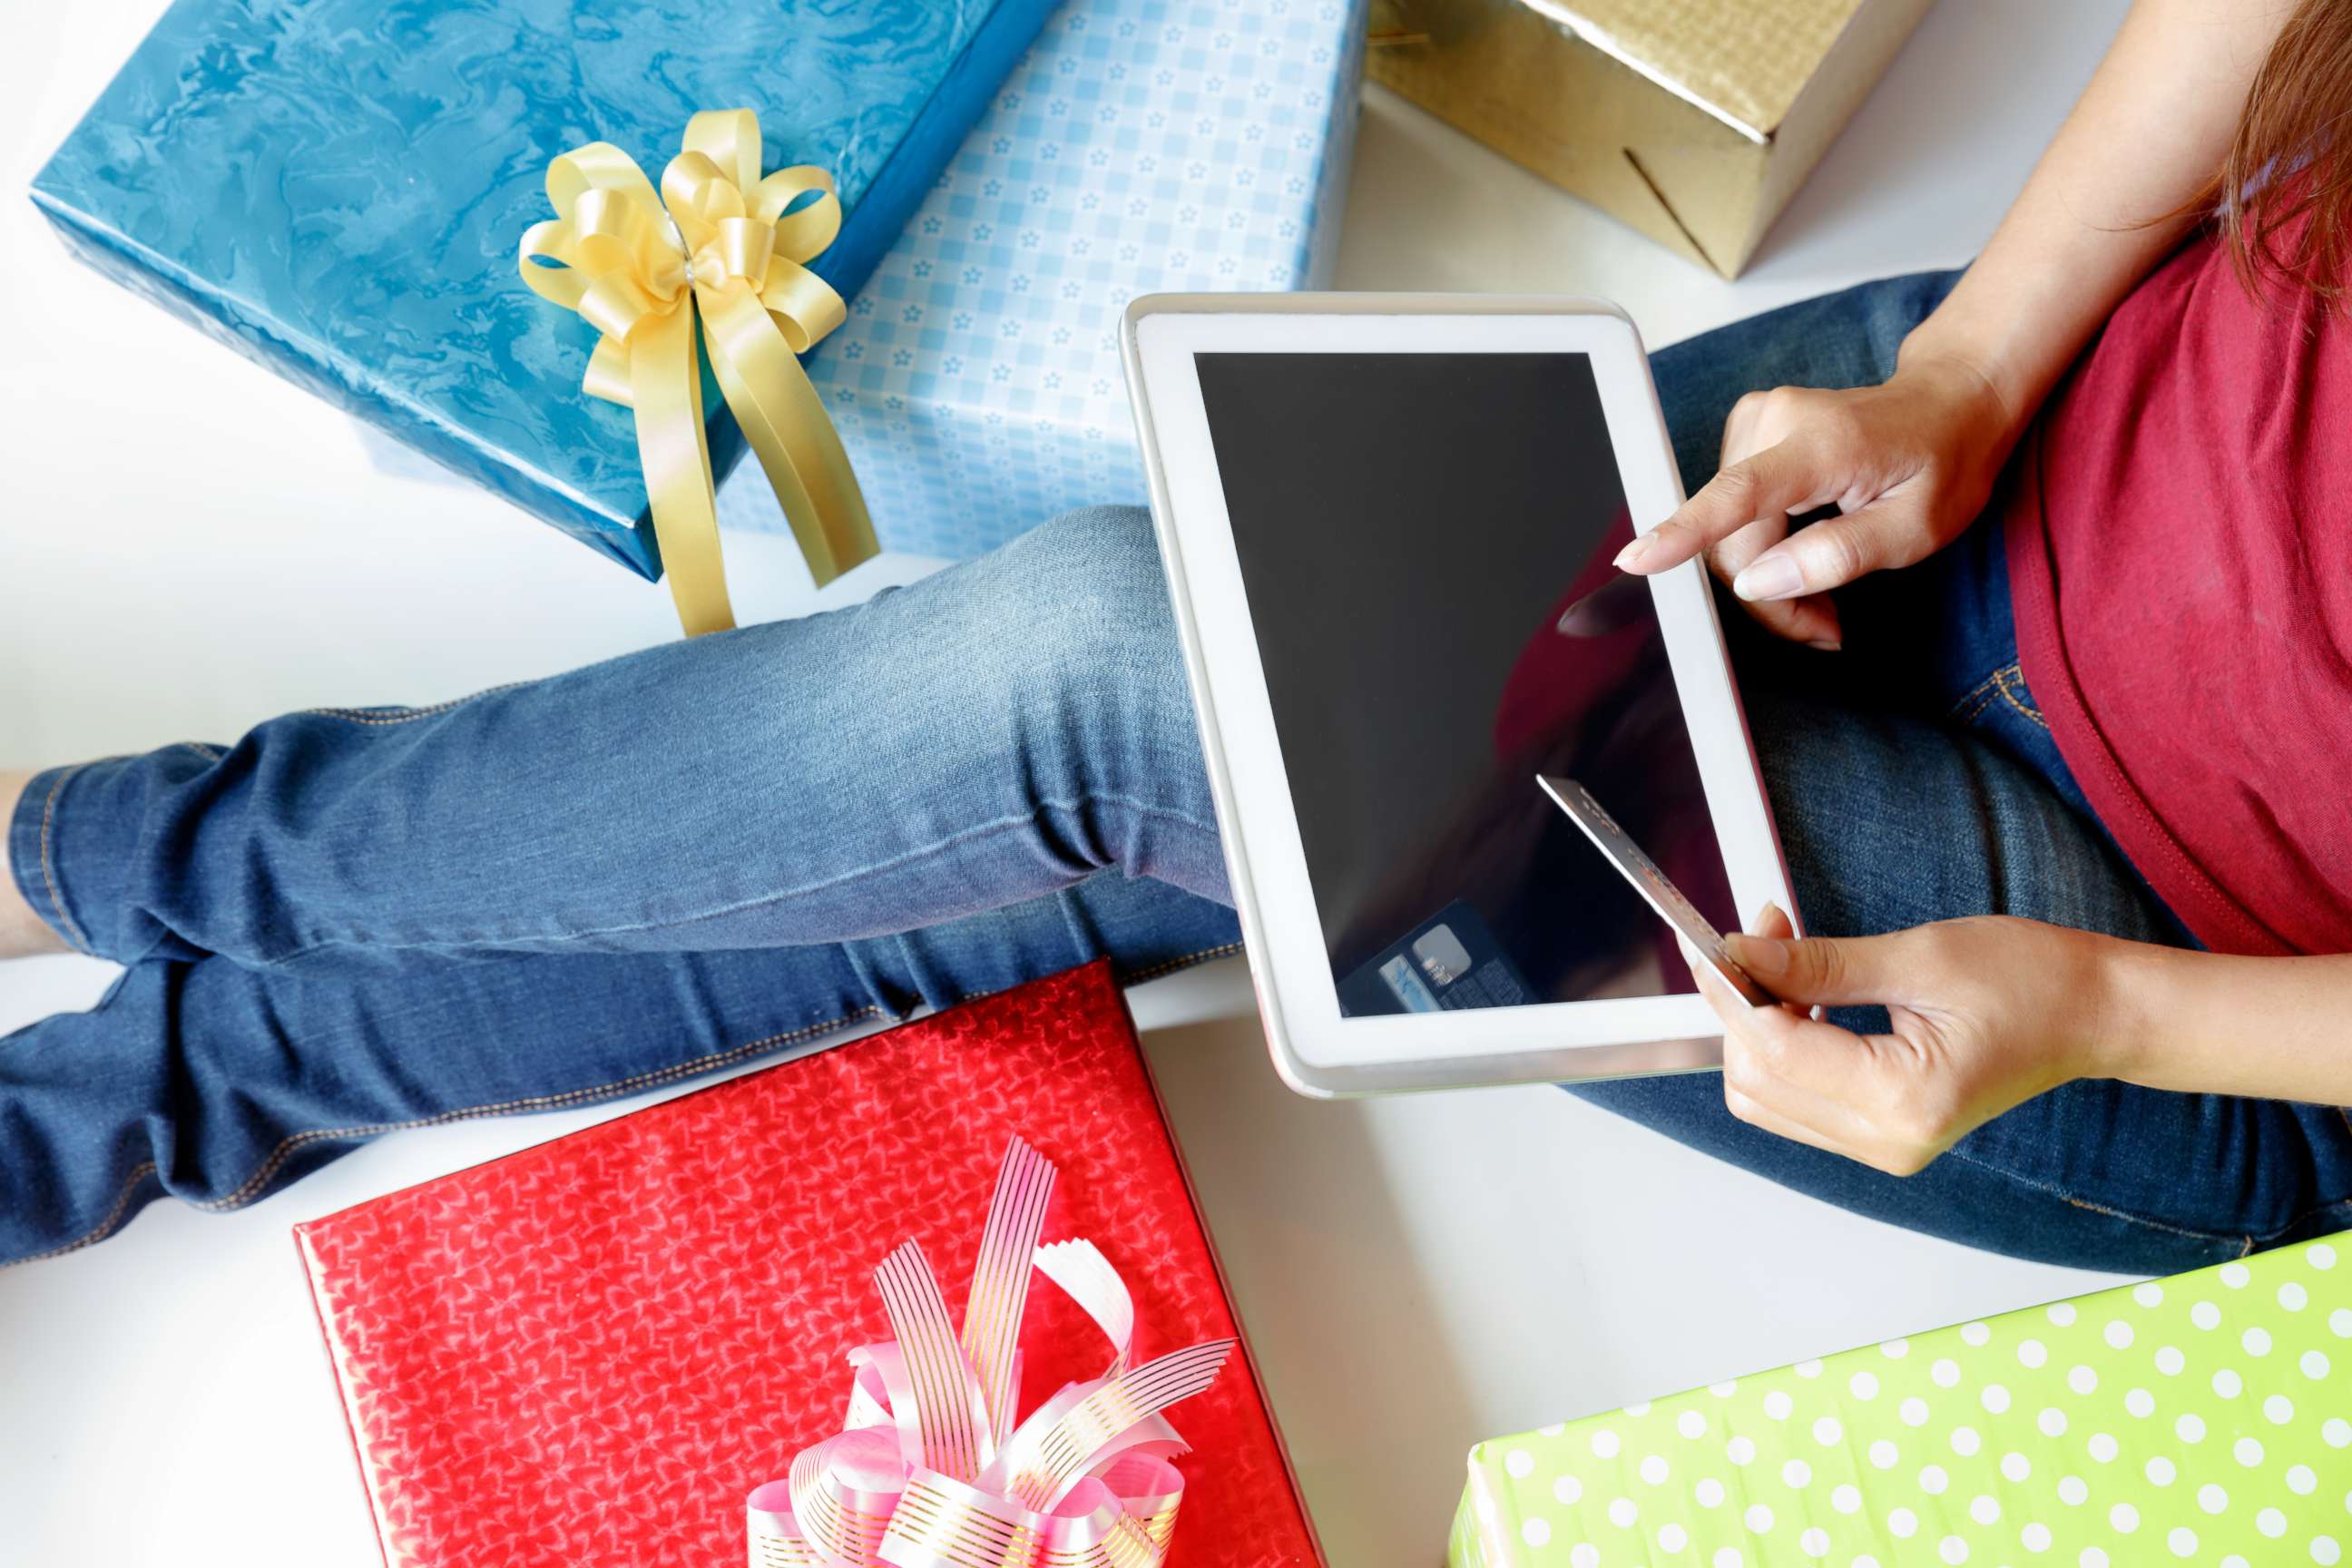 PHOTO: A woman shopping online using her credit card in this undated stock photo.